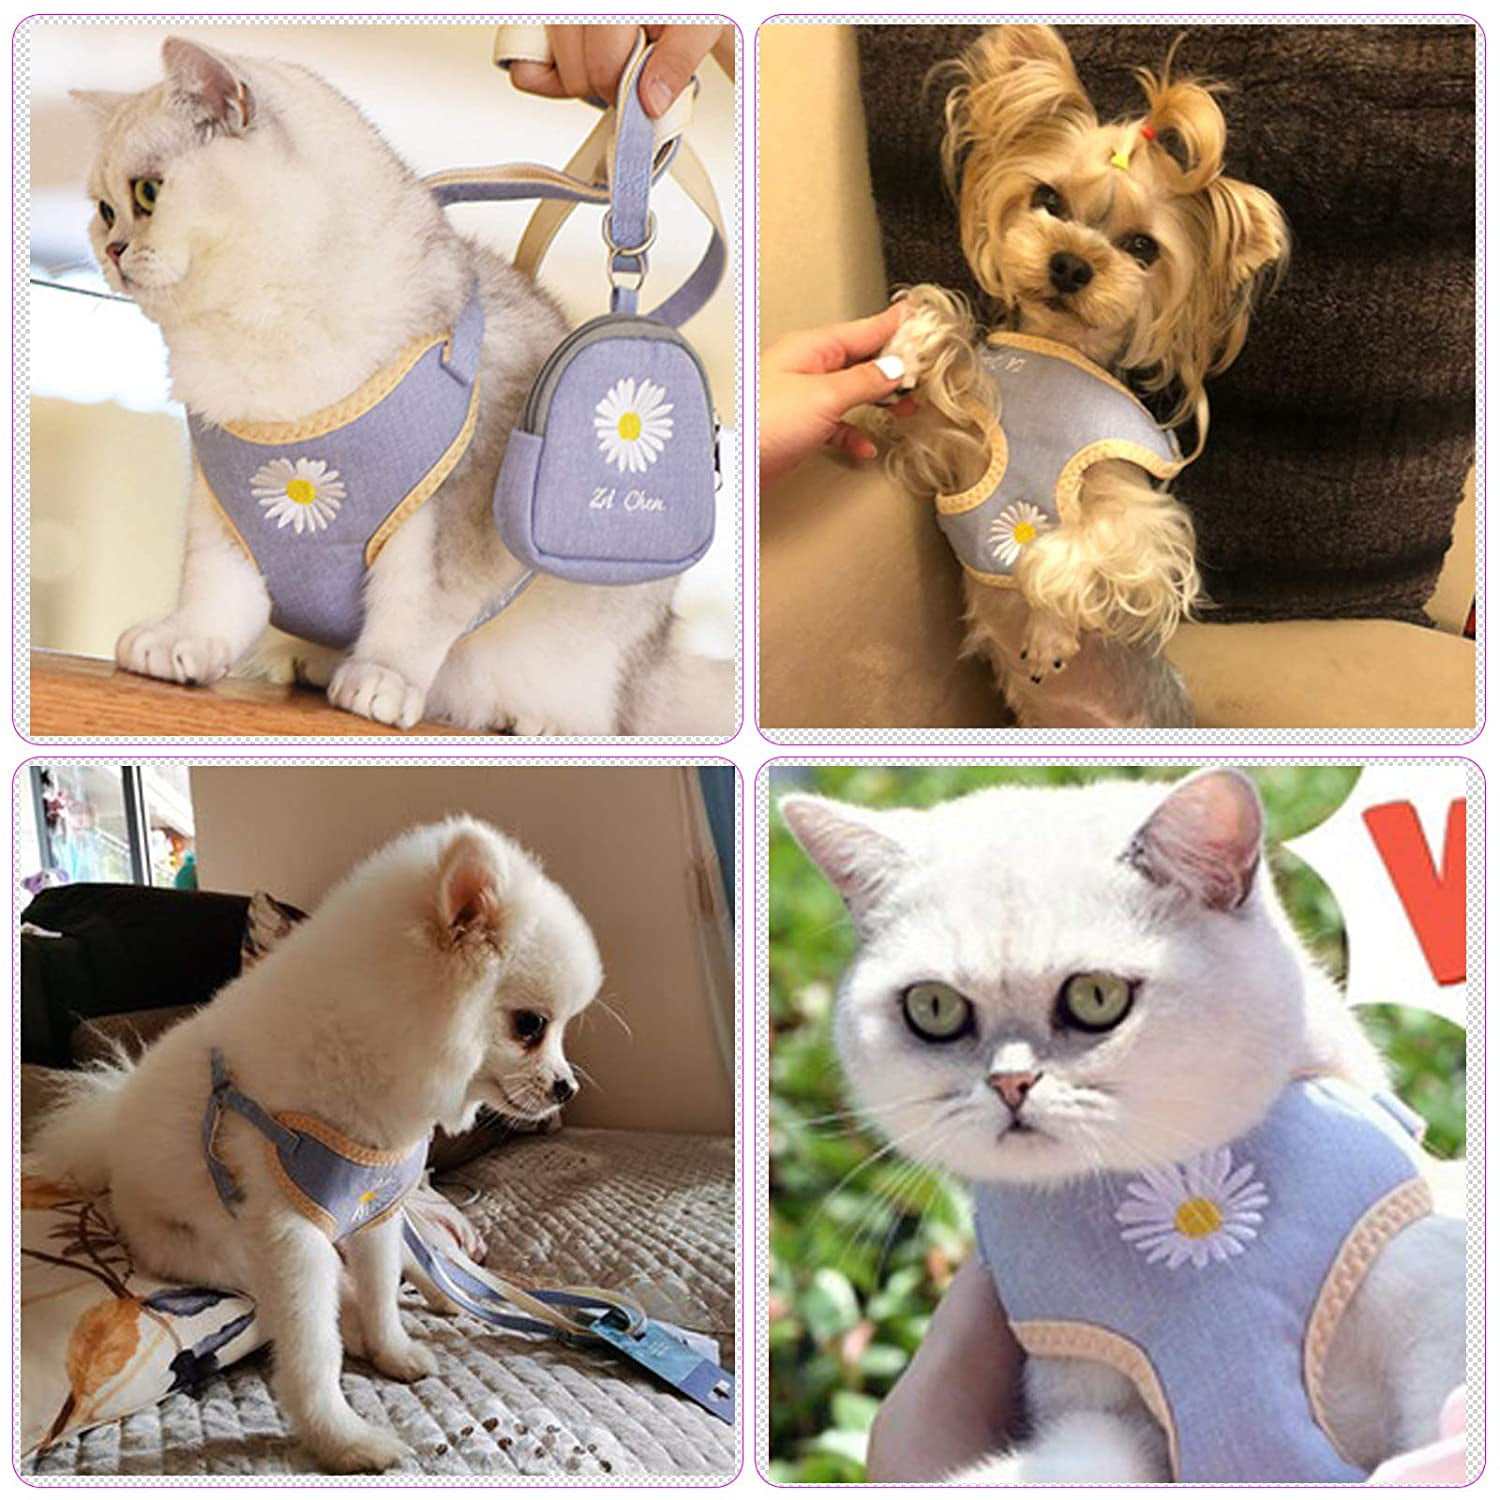 CheeseandU Pet Dog Cat Harness and Leash Set with Bags Soft Mesh Cute Daisy Pattern Embroidery Anti-Escape Dog Cat Walking Vest Harness for Puppy Small Dogs Cats Rabbits Pink